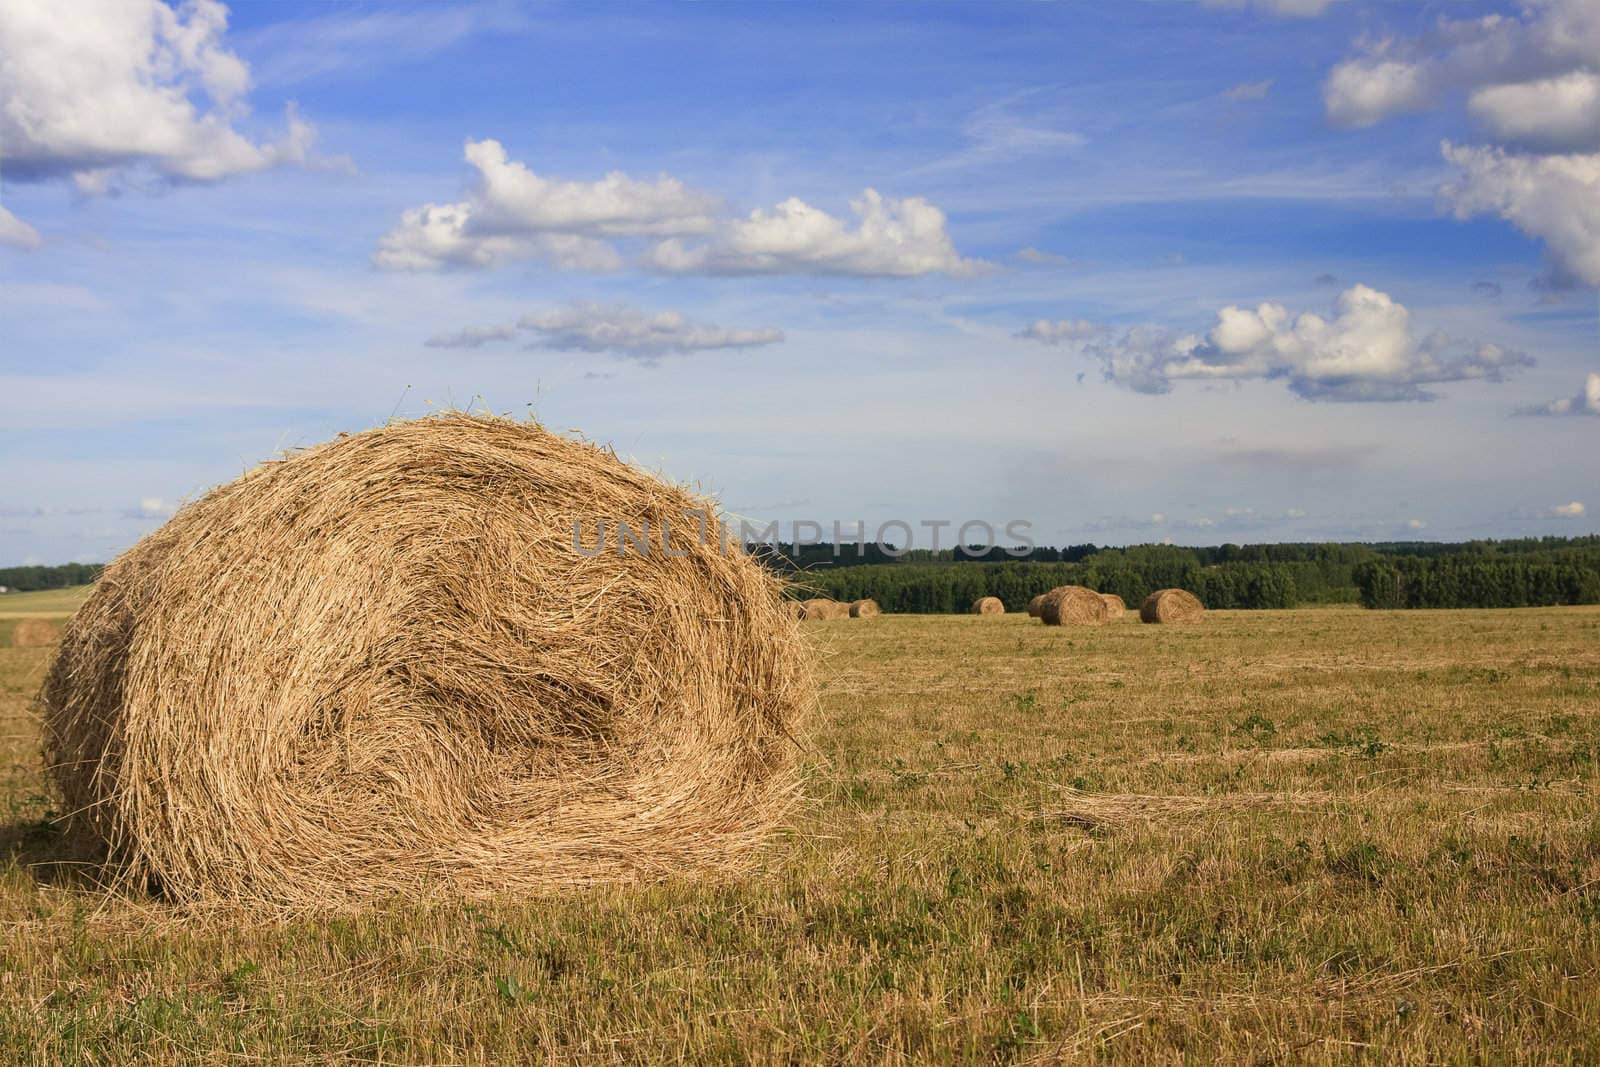 haystack on the field in summer